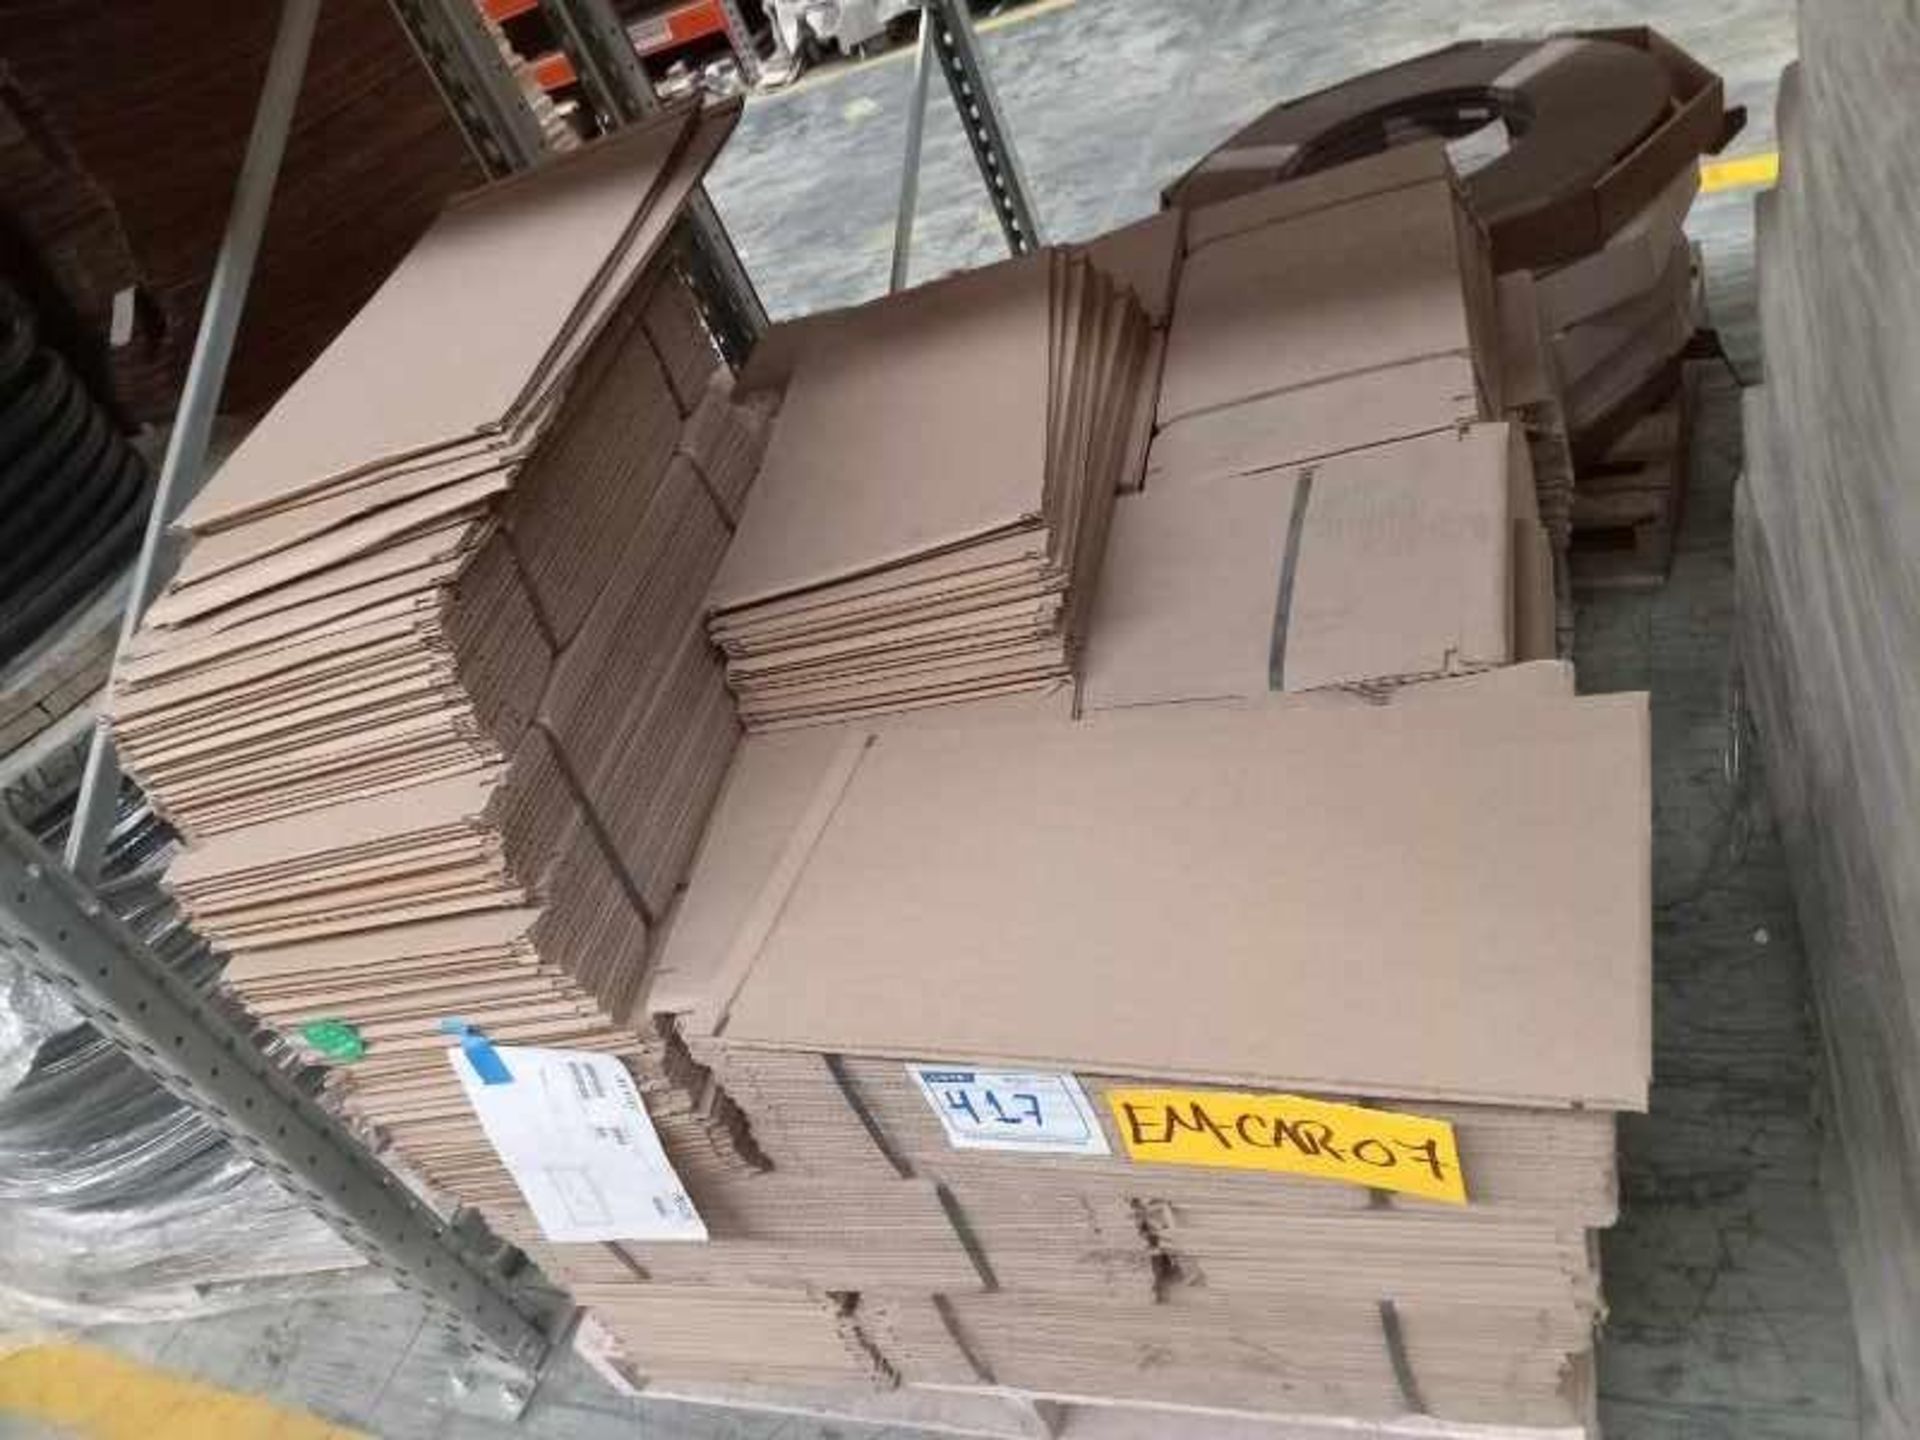 LOT OF APPROXIMATELY (83,310) PCS OF CARDBOARD BOXES AND ACCESSORIES - Image 24 of 119